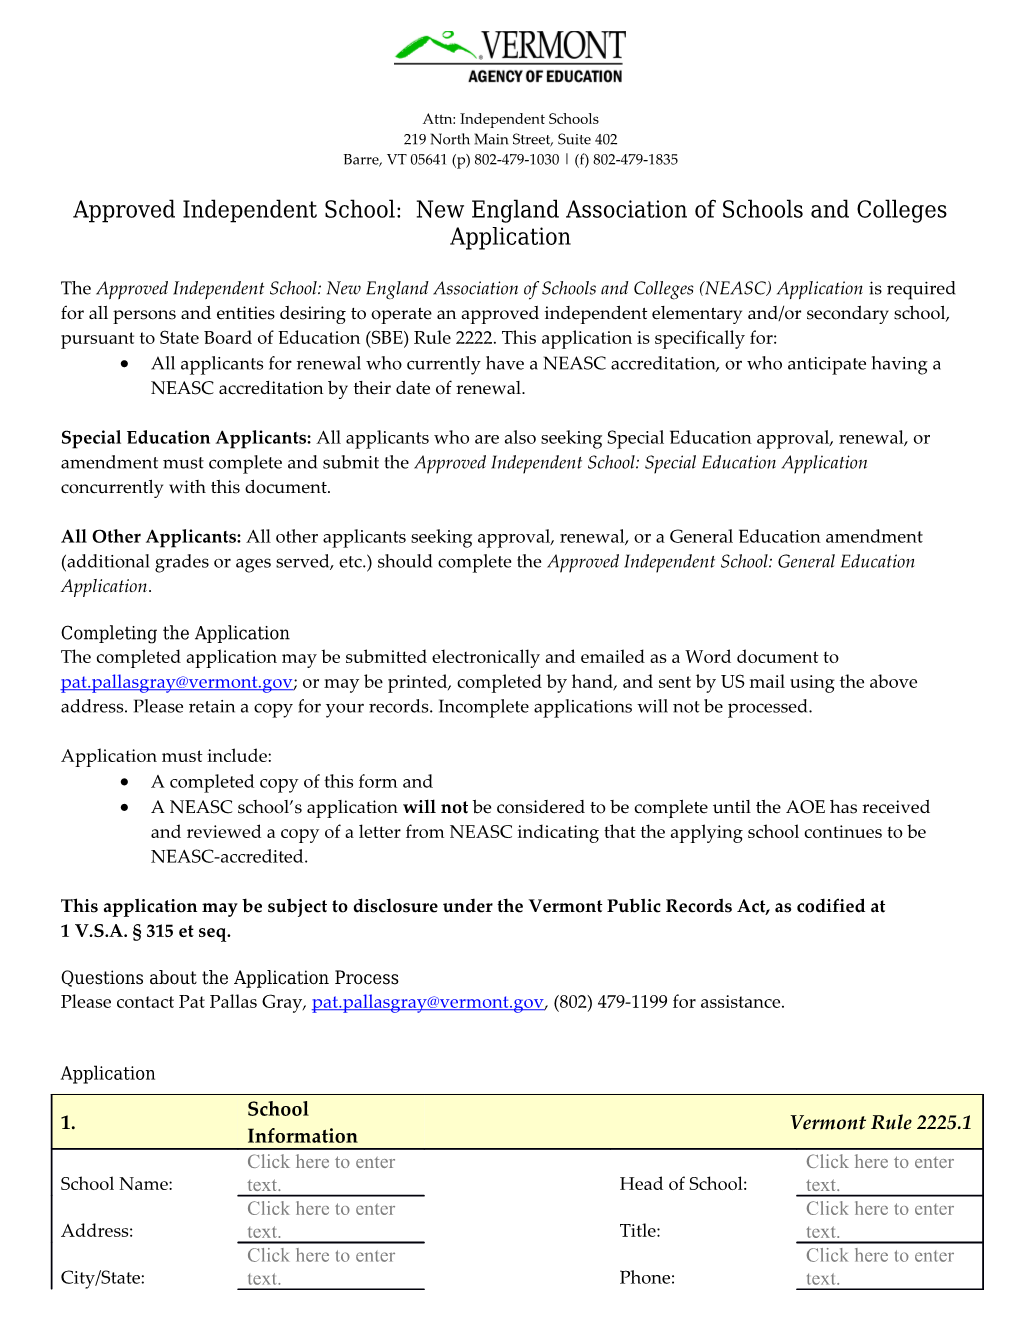 Approved Independent School: New England Association of Schools and Colleges Application